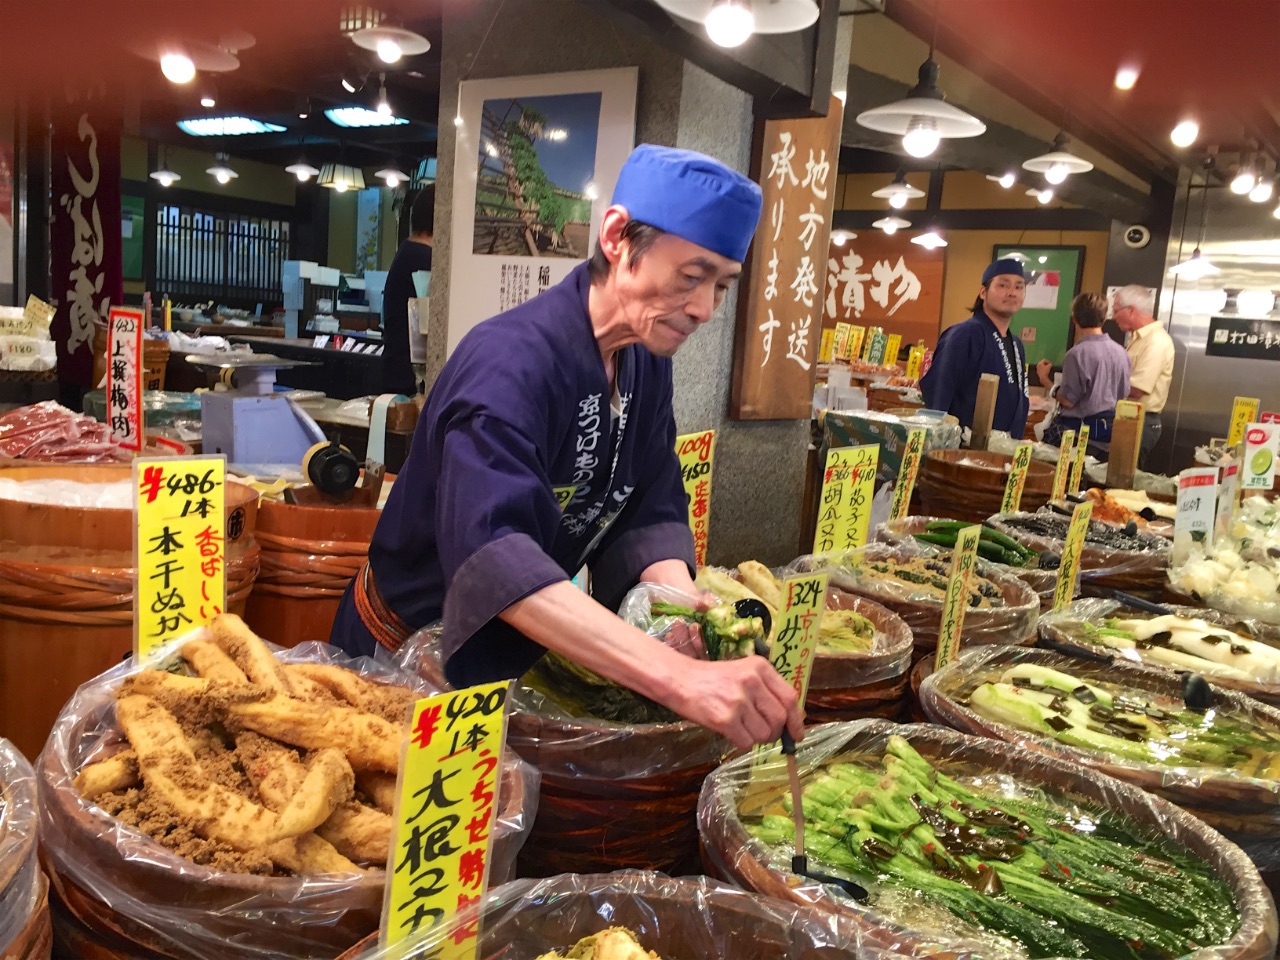 Pickles and other traditional Japanese delicacies.